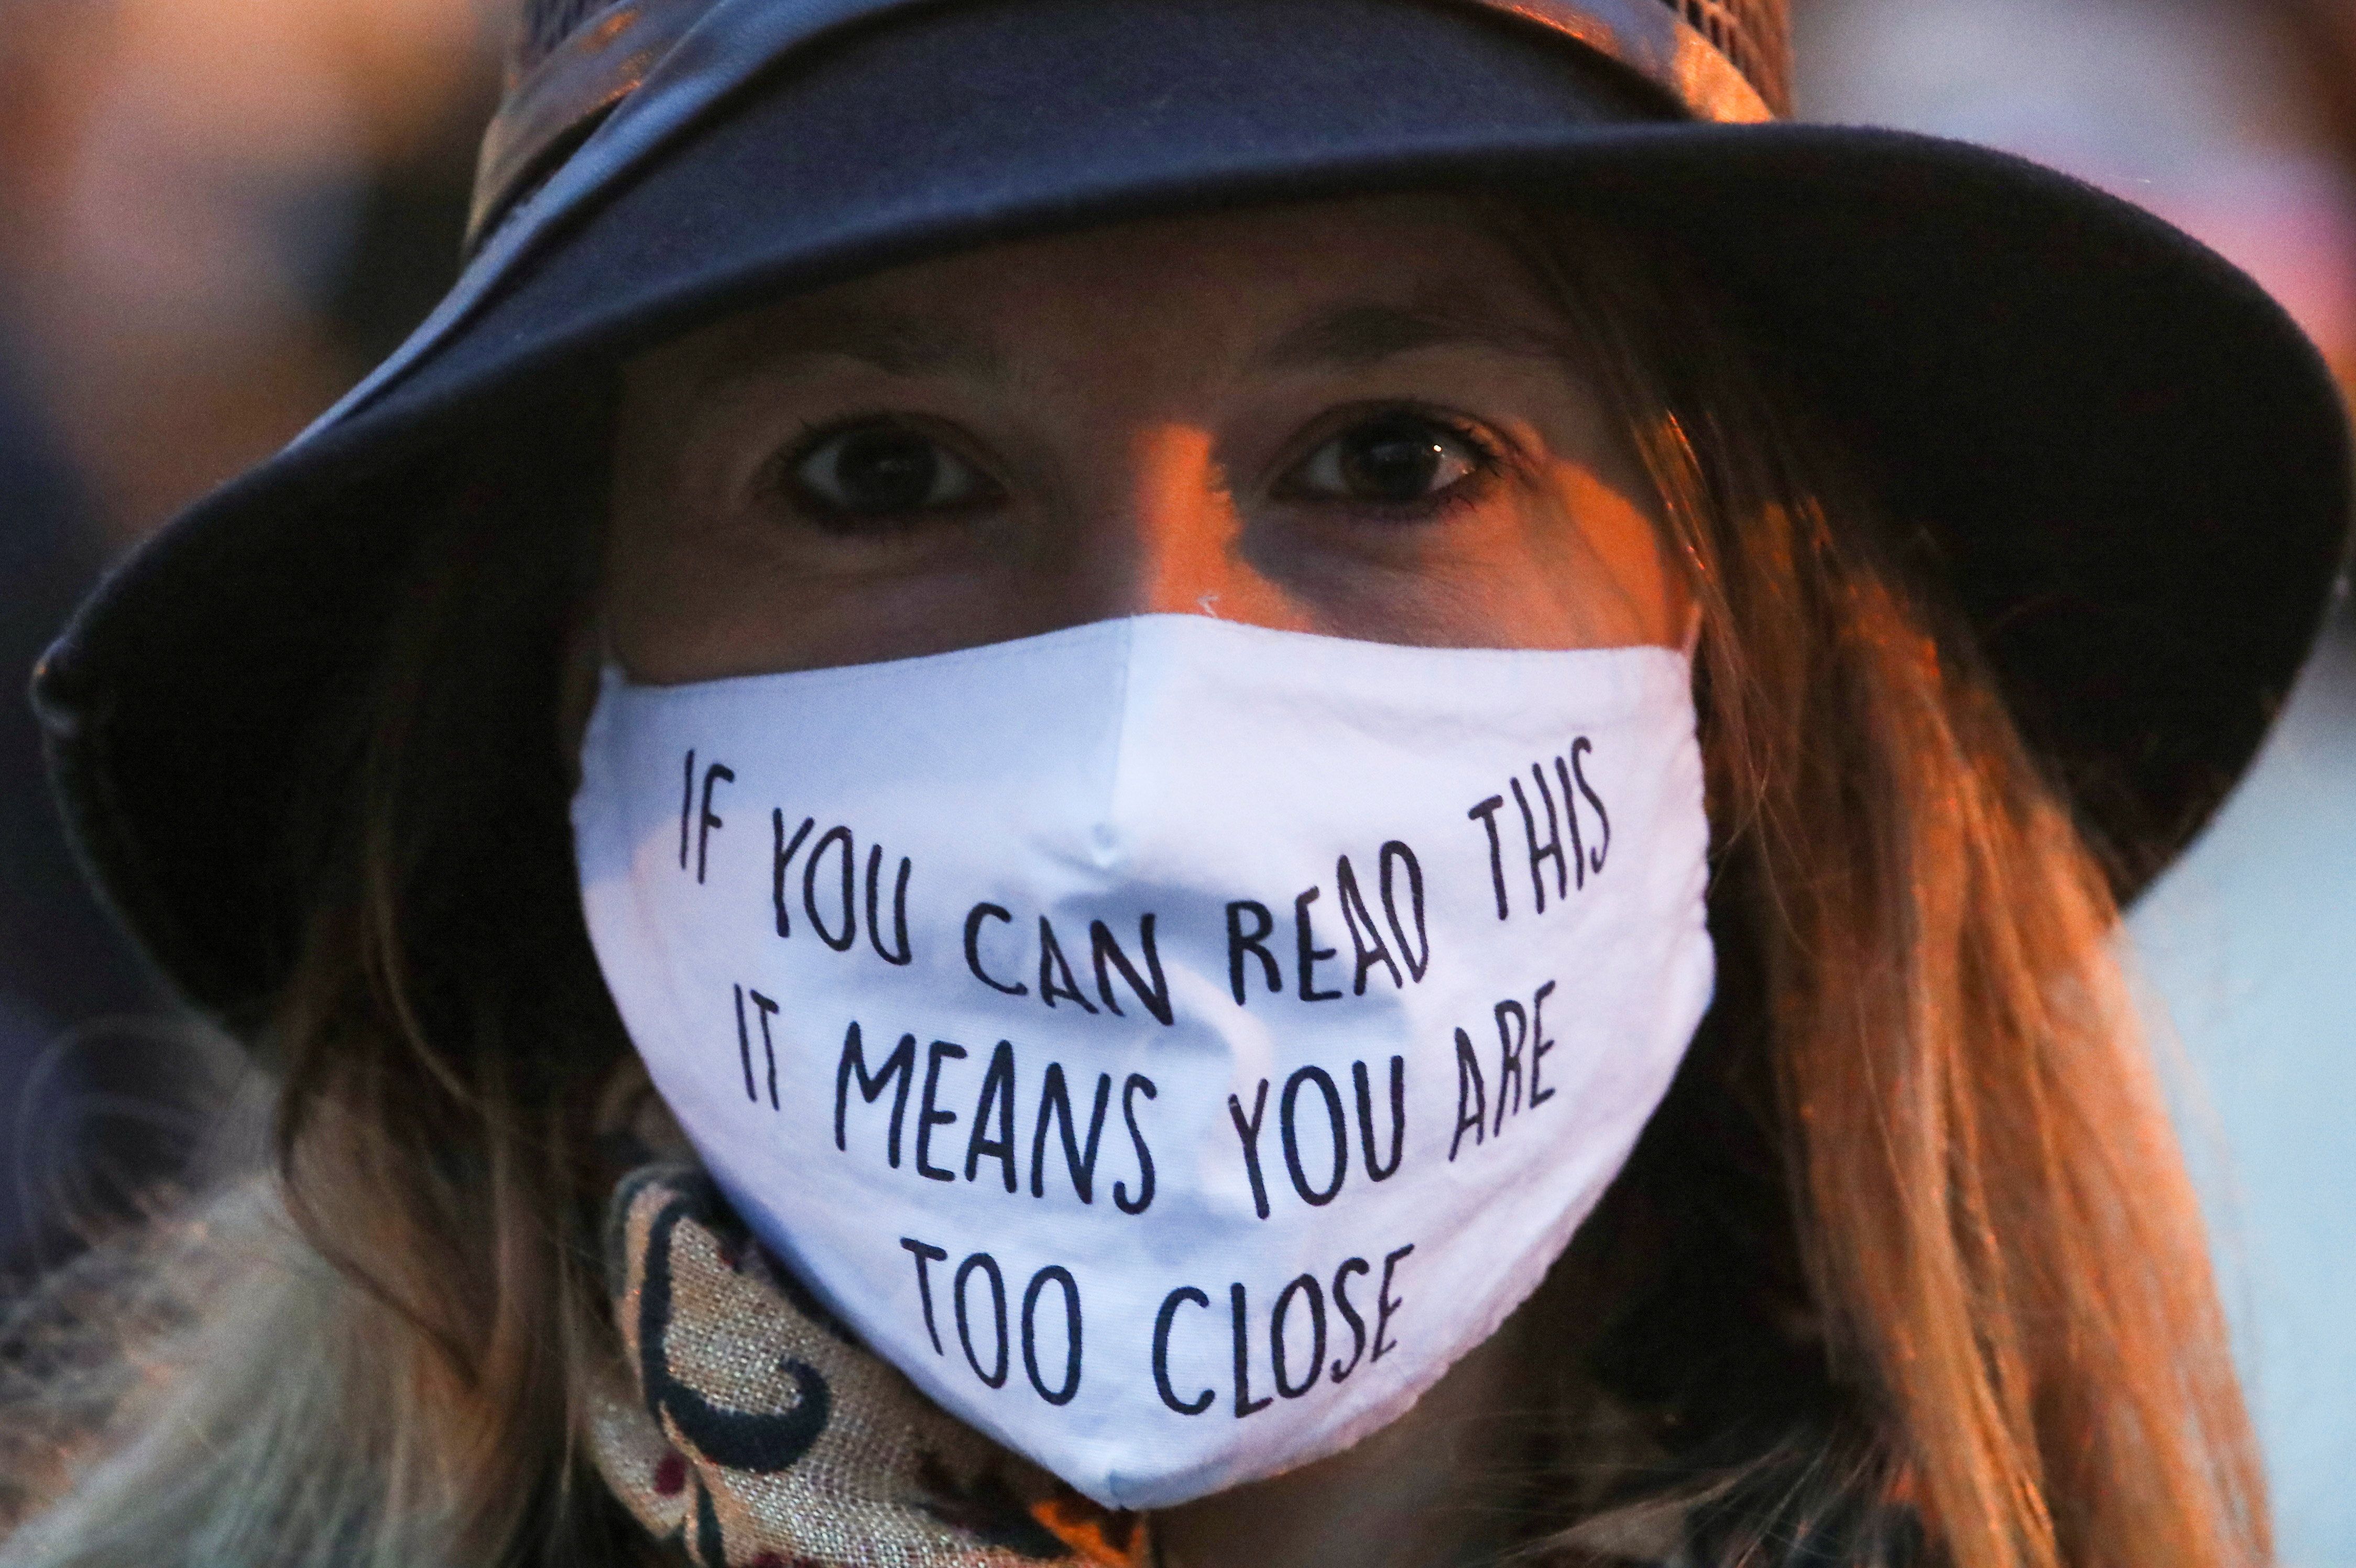 A woman wearing a face mask that says, "if you can read this it means you are too close."